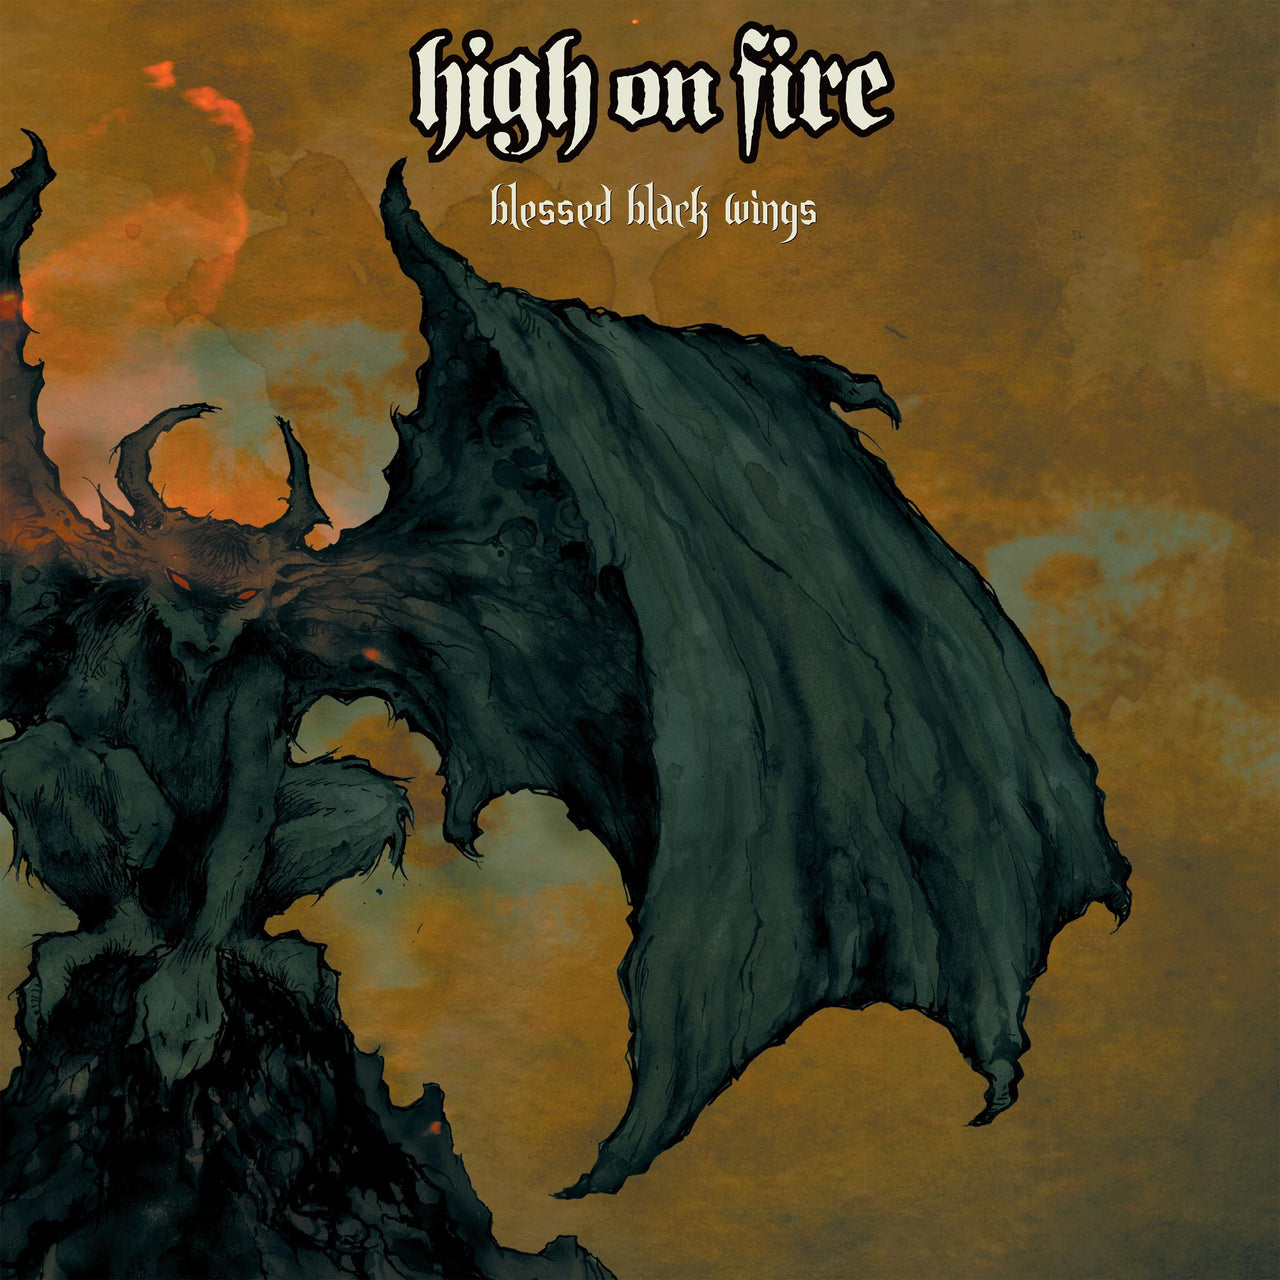 Buy – High on Fire "Blessed Black Wings" 2x12" – Band & Music Merch – Cold Cuts Merch